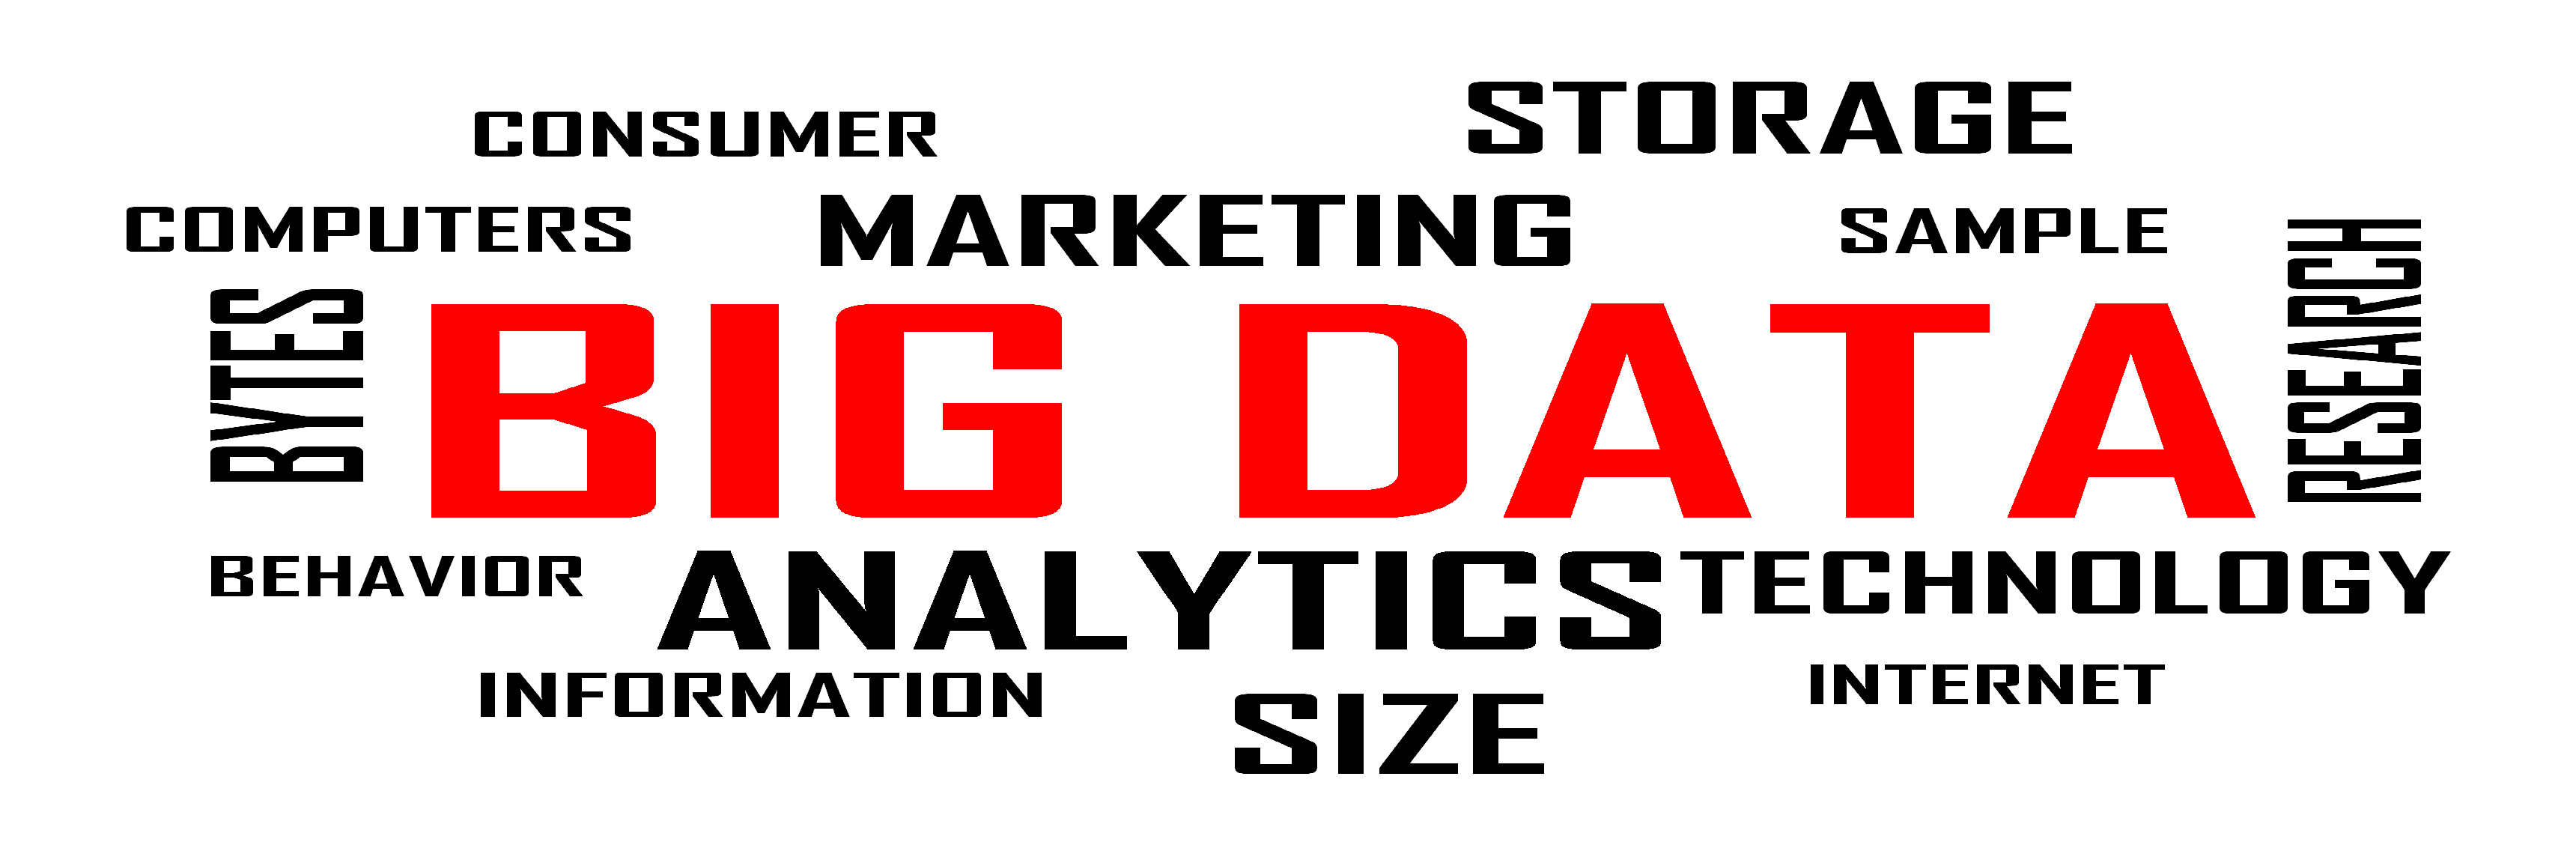 How Big Data strategies Can Increase Revenue and Reduce Costs for Media Companies